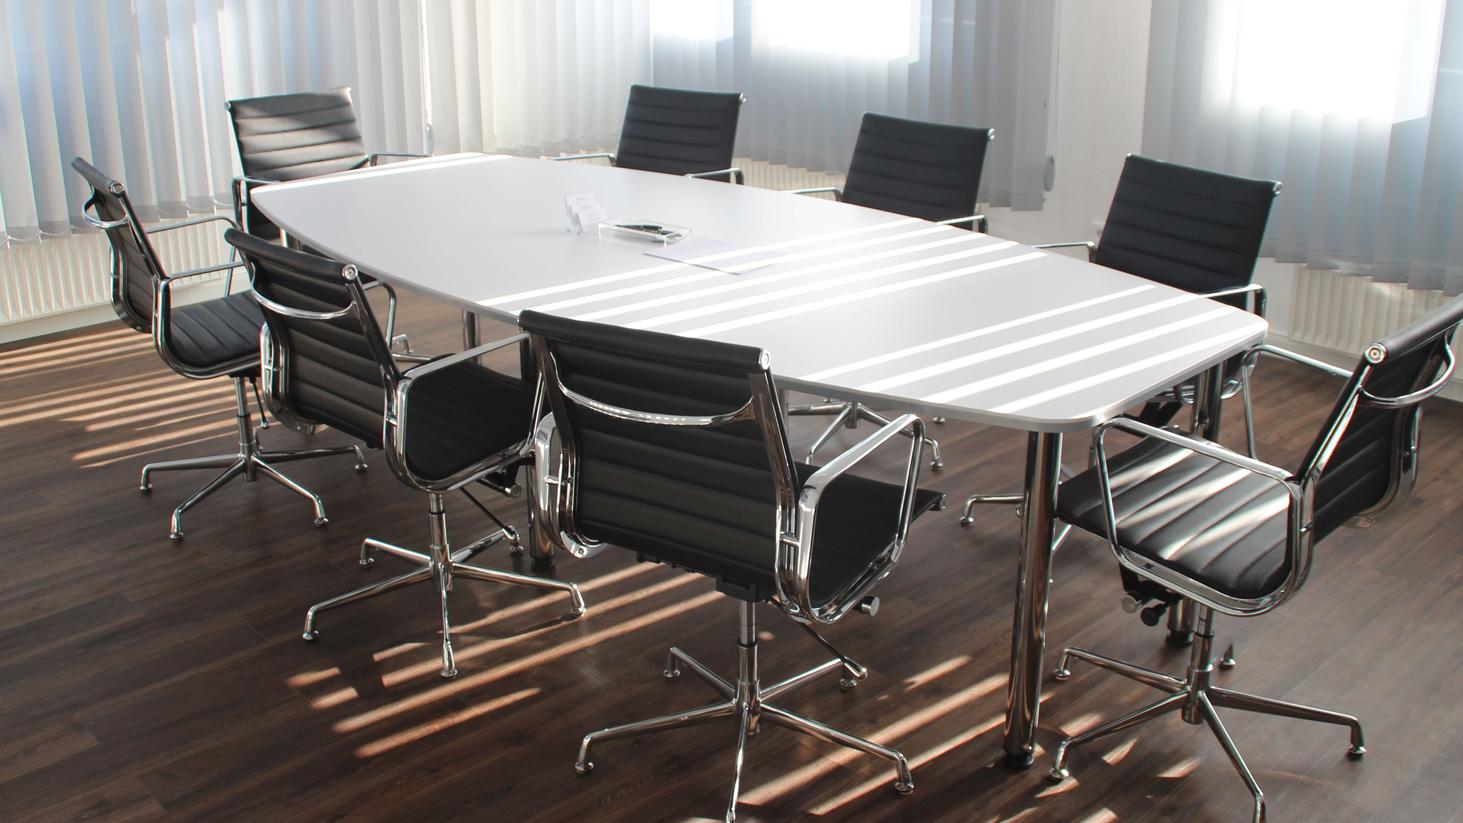 Meeting Rooms for Hire in Melbourne CBD